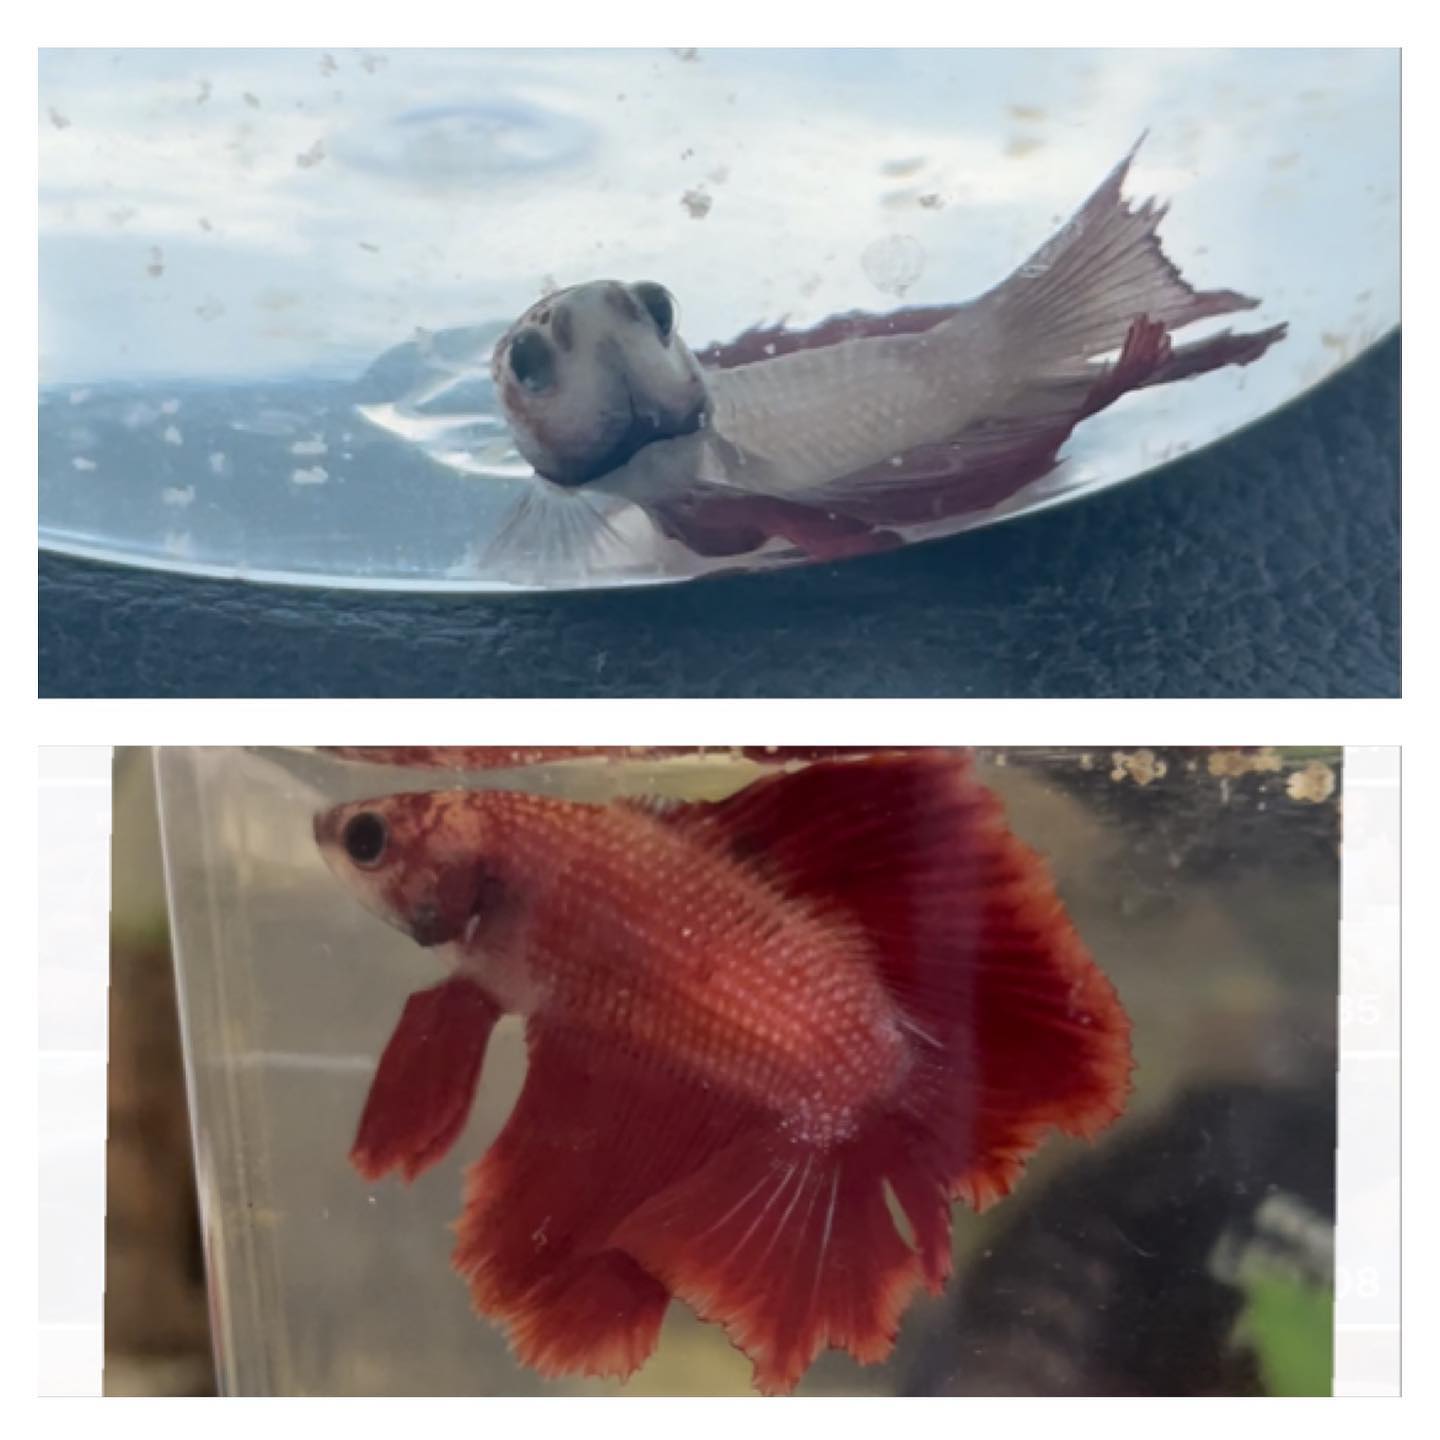 Bongo fish before and after rescue